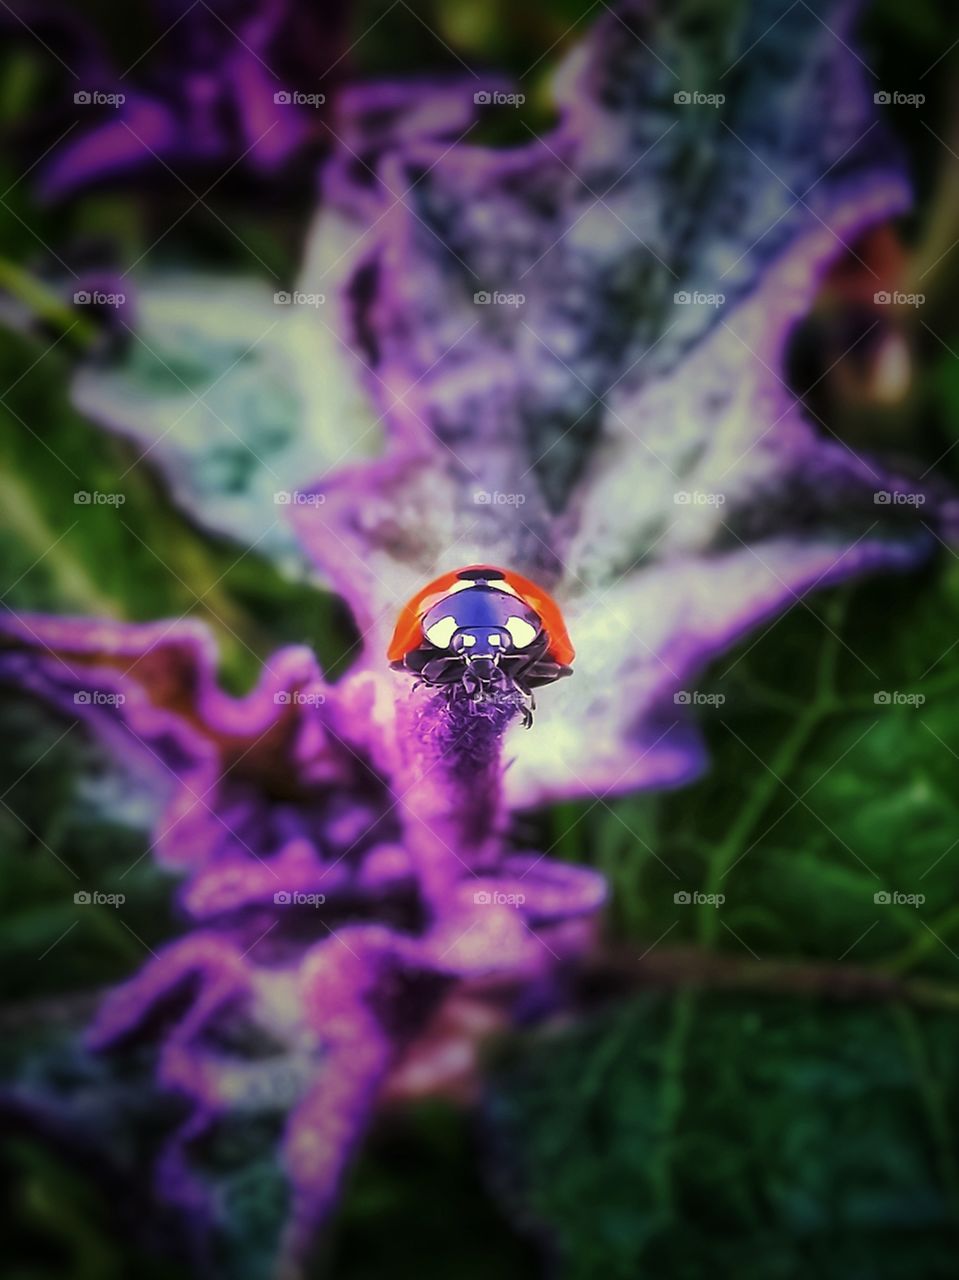 Zoomed in on a lady bug on a purple and green fuzzy leaf weed